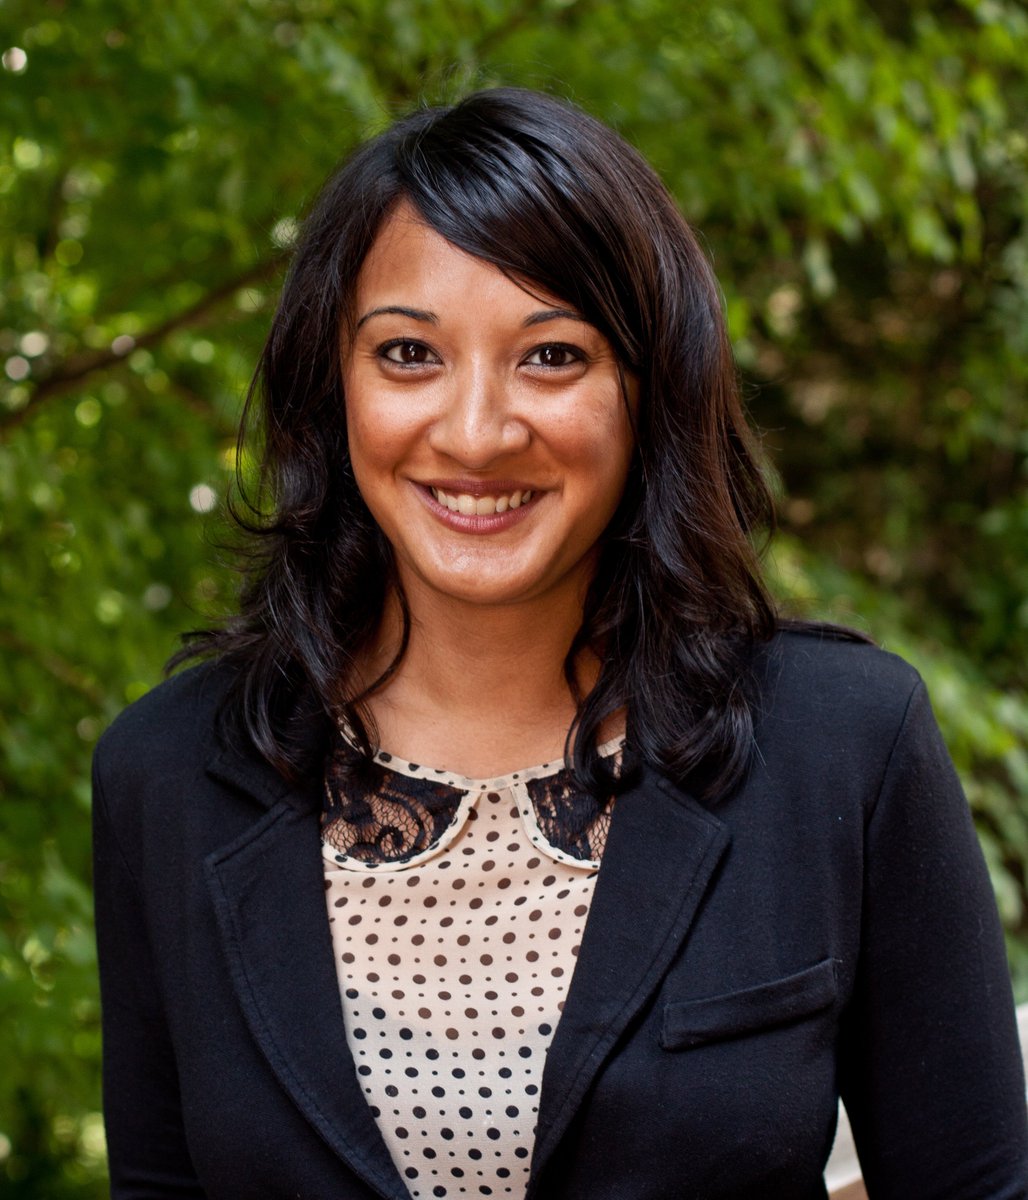 Congratulations to @cornellgov prof @sabrinamkarim on being awarded a PCCW Affinito-Stewart Grant in the amount of $10,000 by @Cornell_PCCW for her proposal: 'Post-Conflict Sexual Violence in Liberia'
Terrific news! Thank you for your work in this area! @CornellCAS @CornellNews